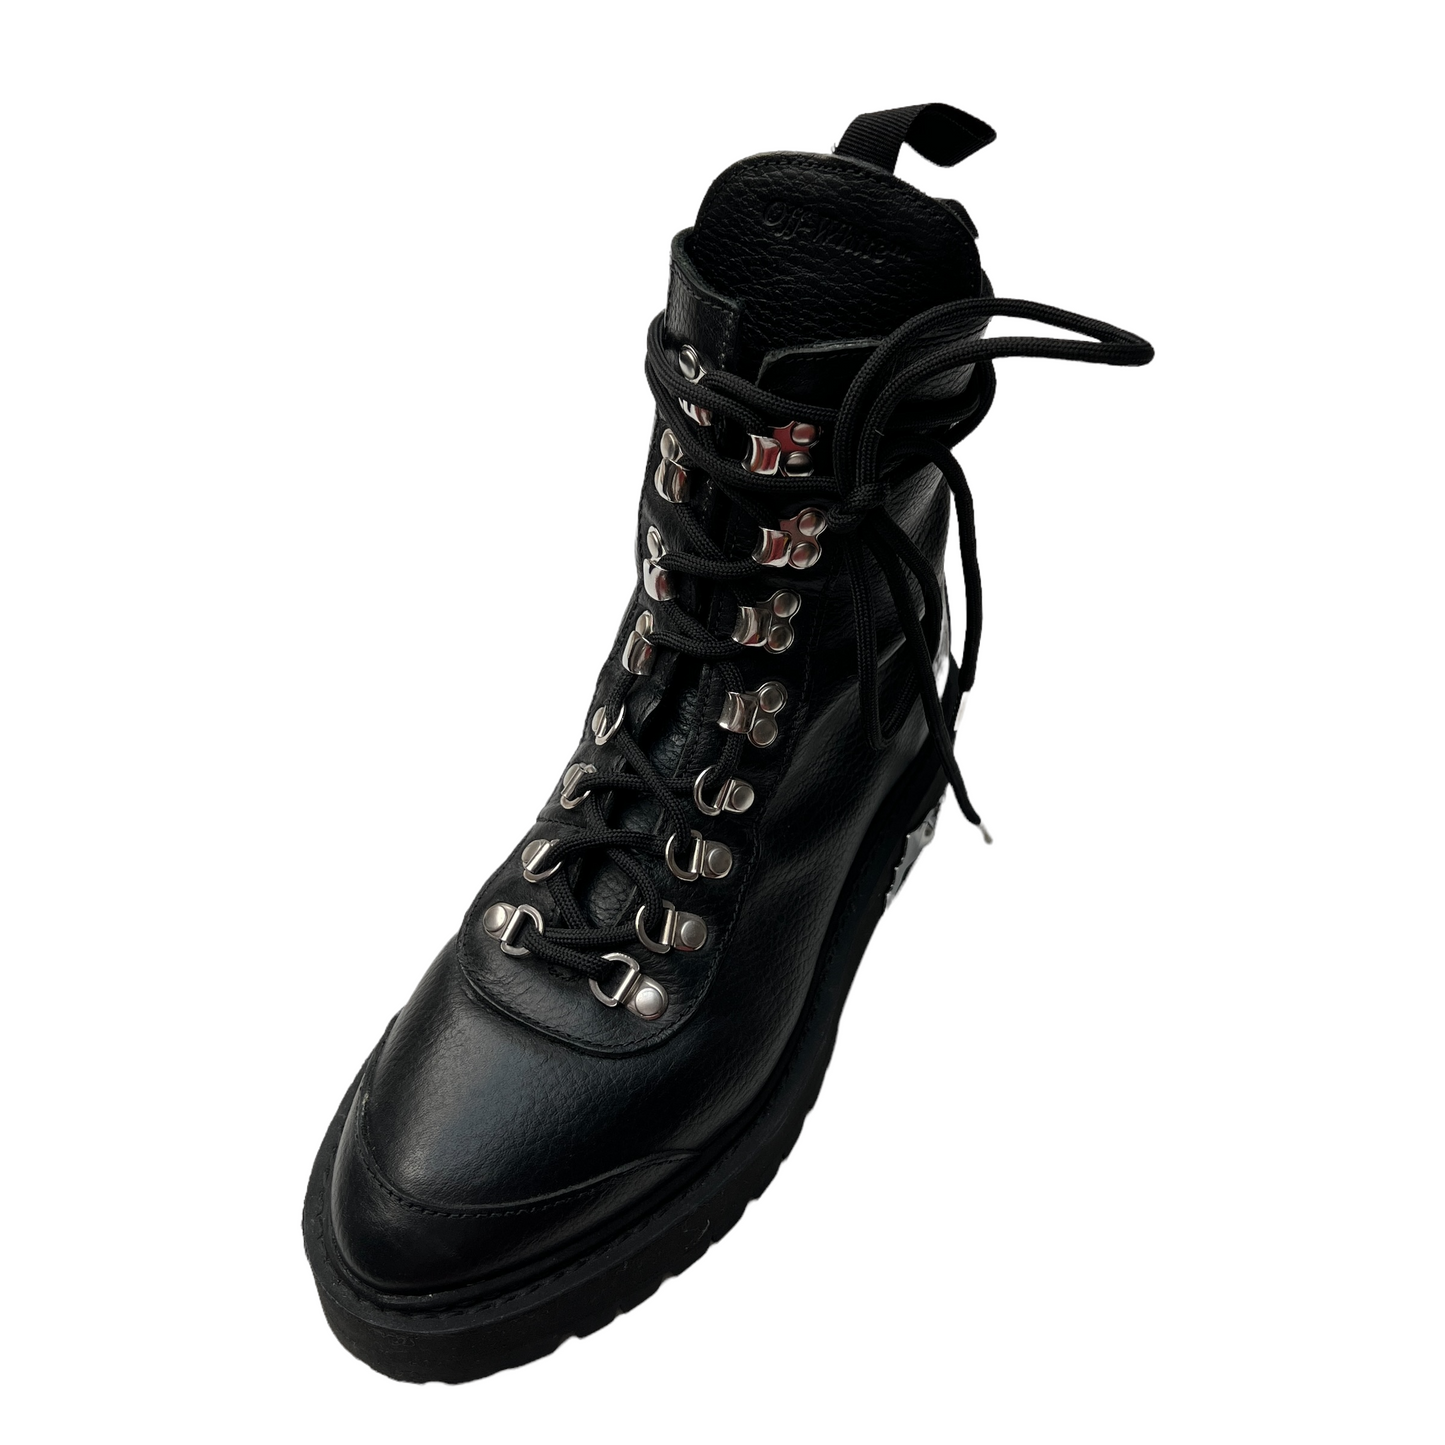 Black Leather Moto Boots - 38